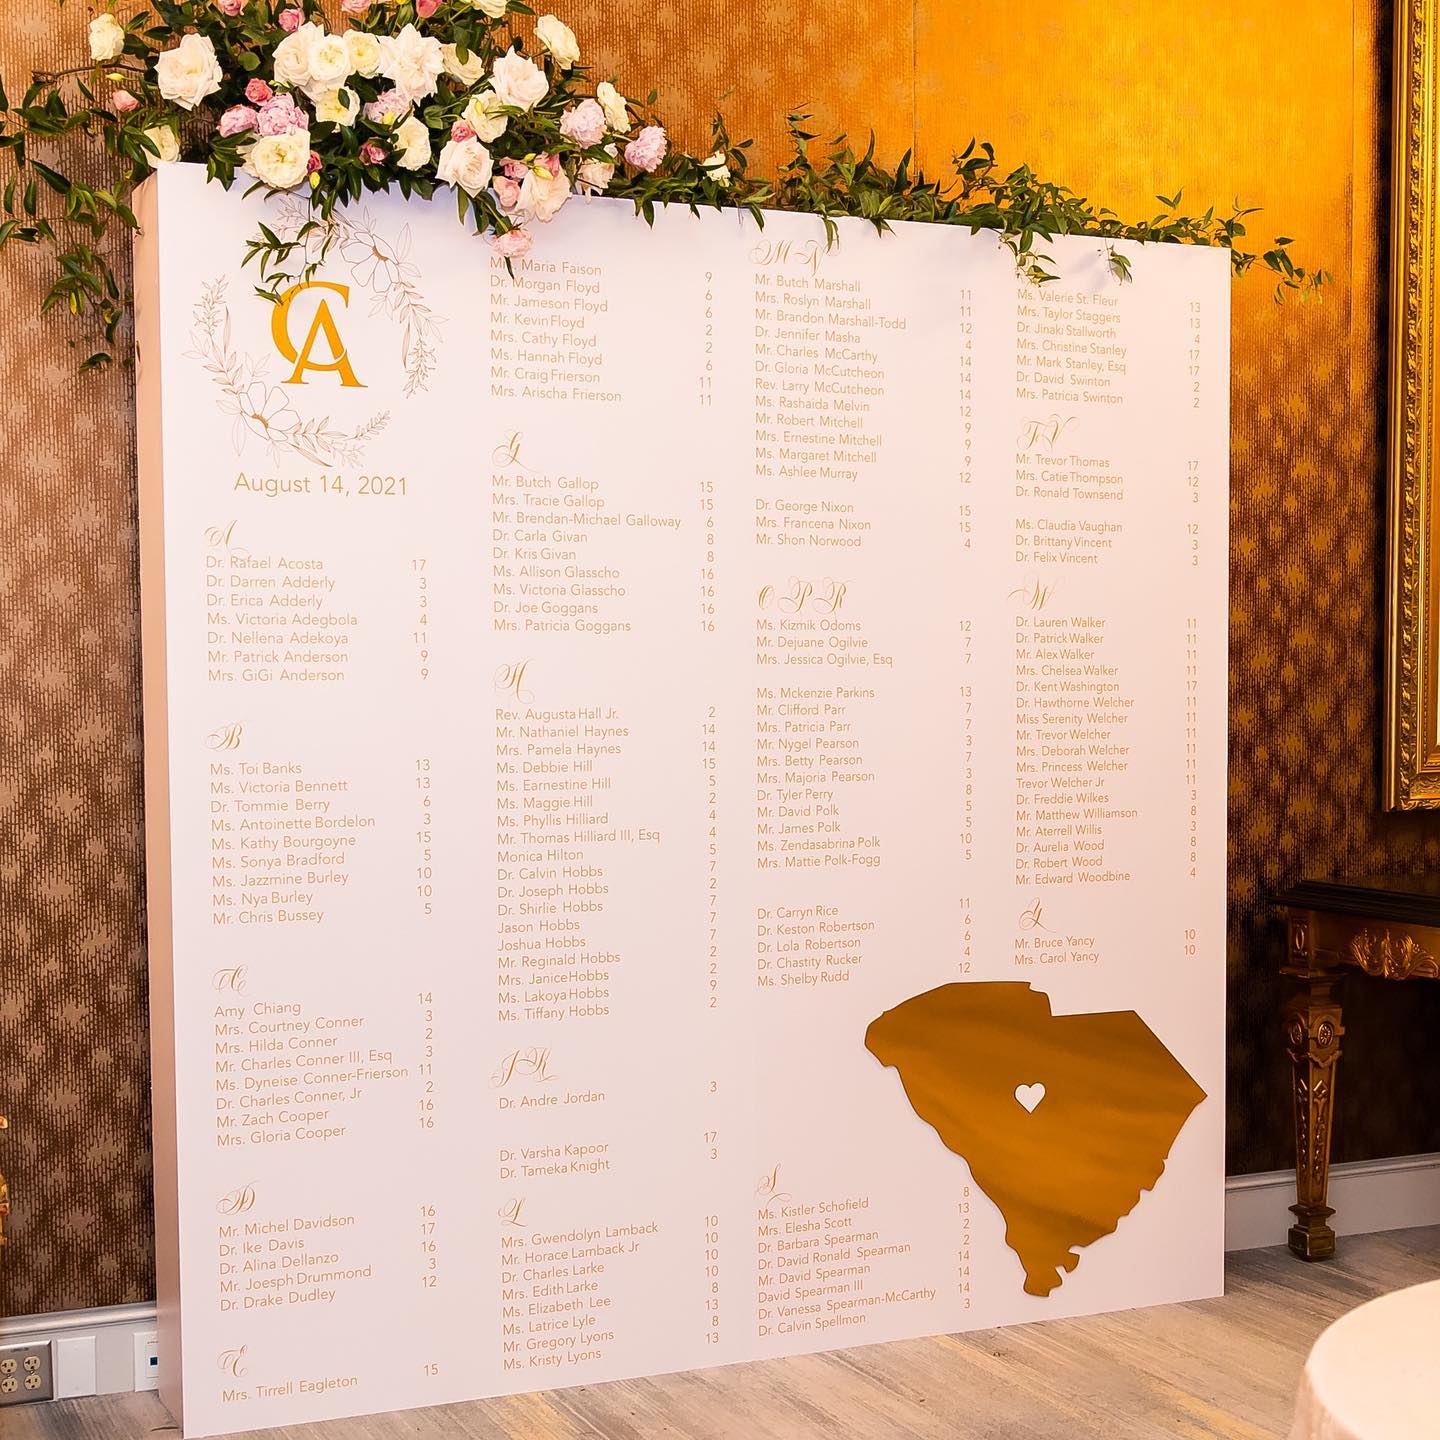 Personalized Seating Chart with Venue Map